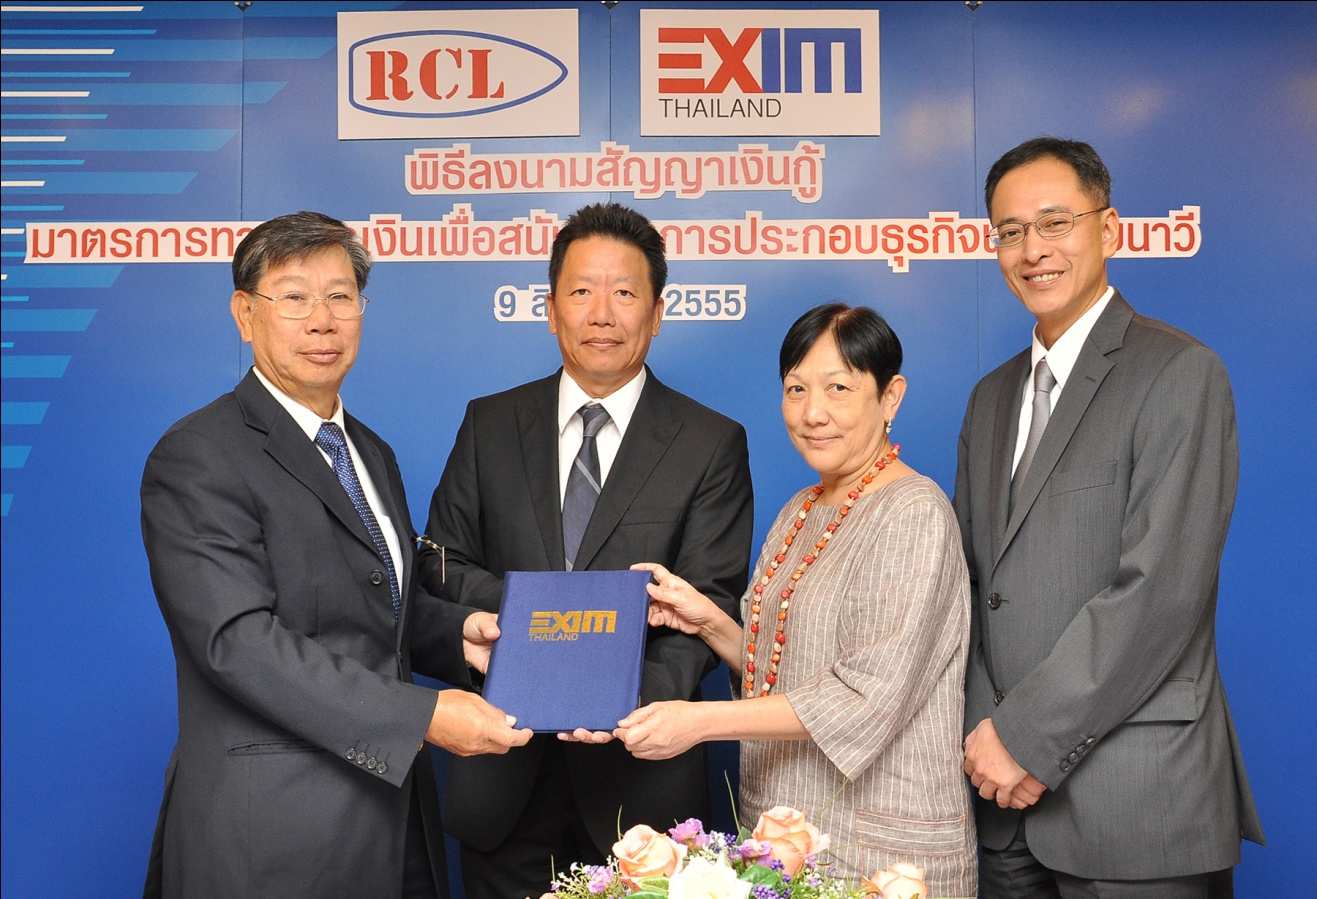 EXIM Thailand Extends Loans to RCL to Support Government’s Merchant Marine Promotion Policy